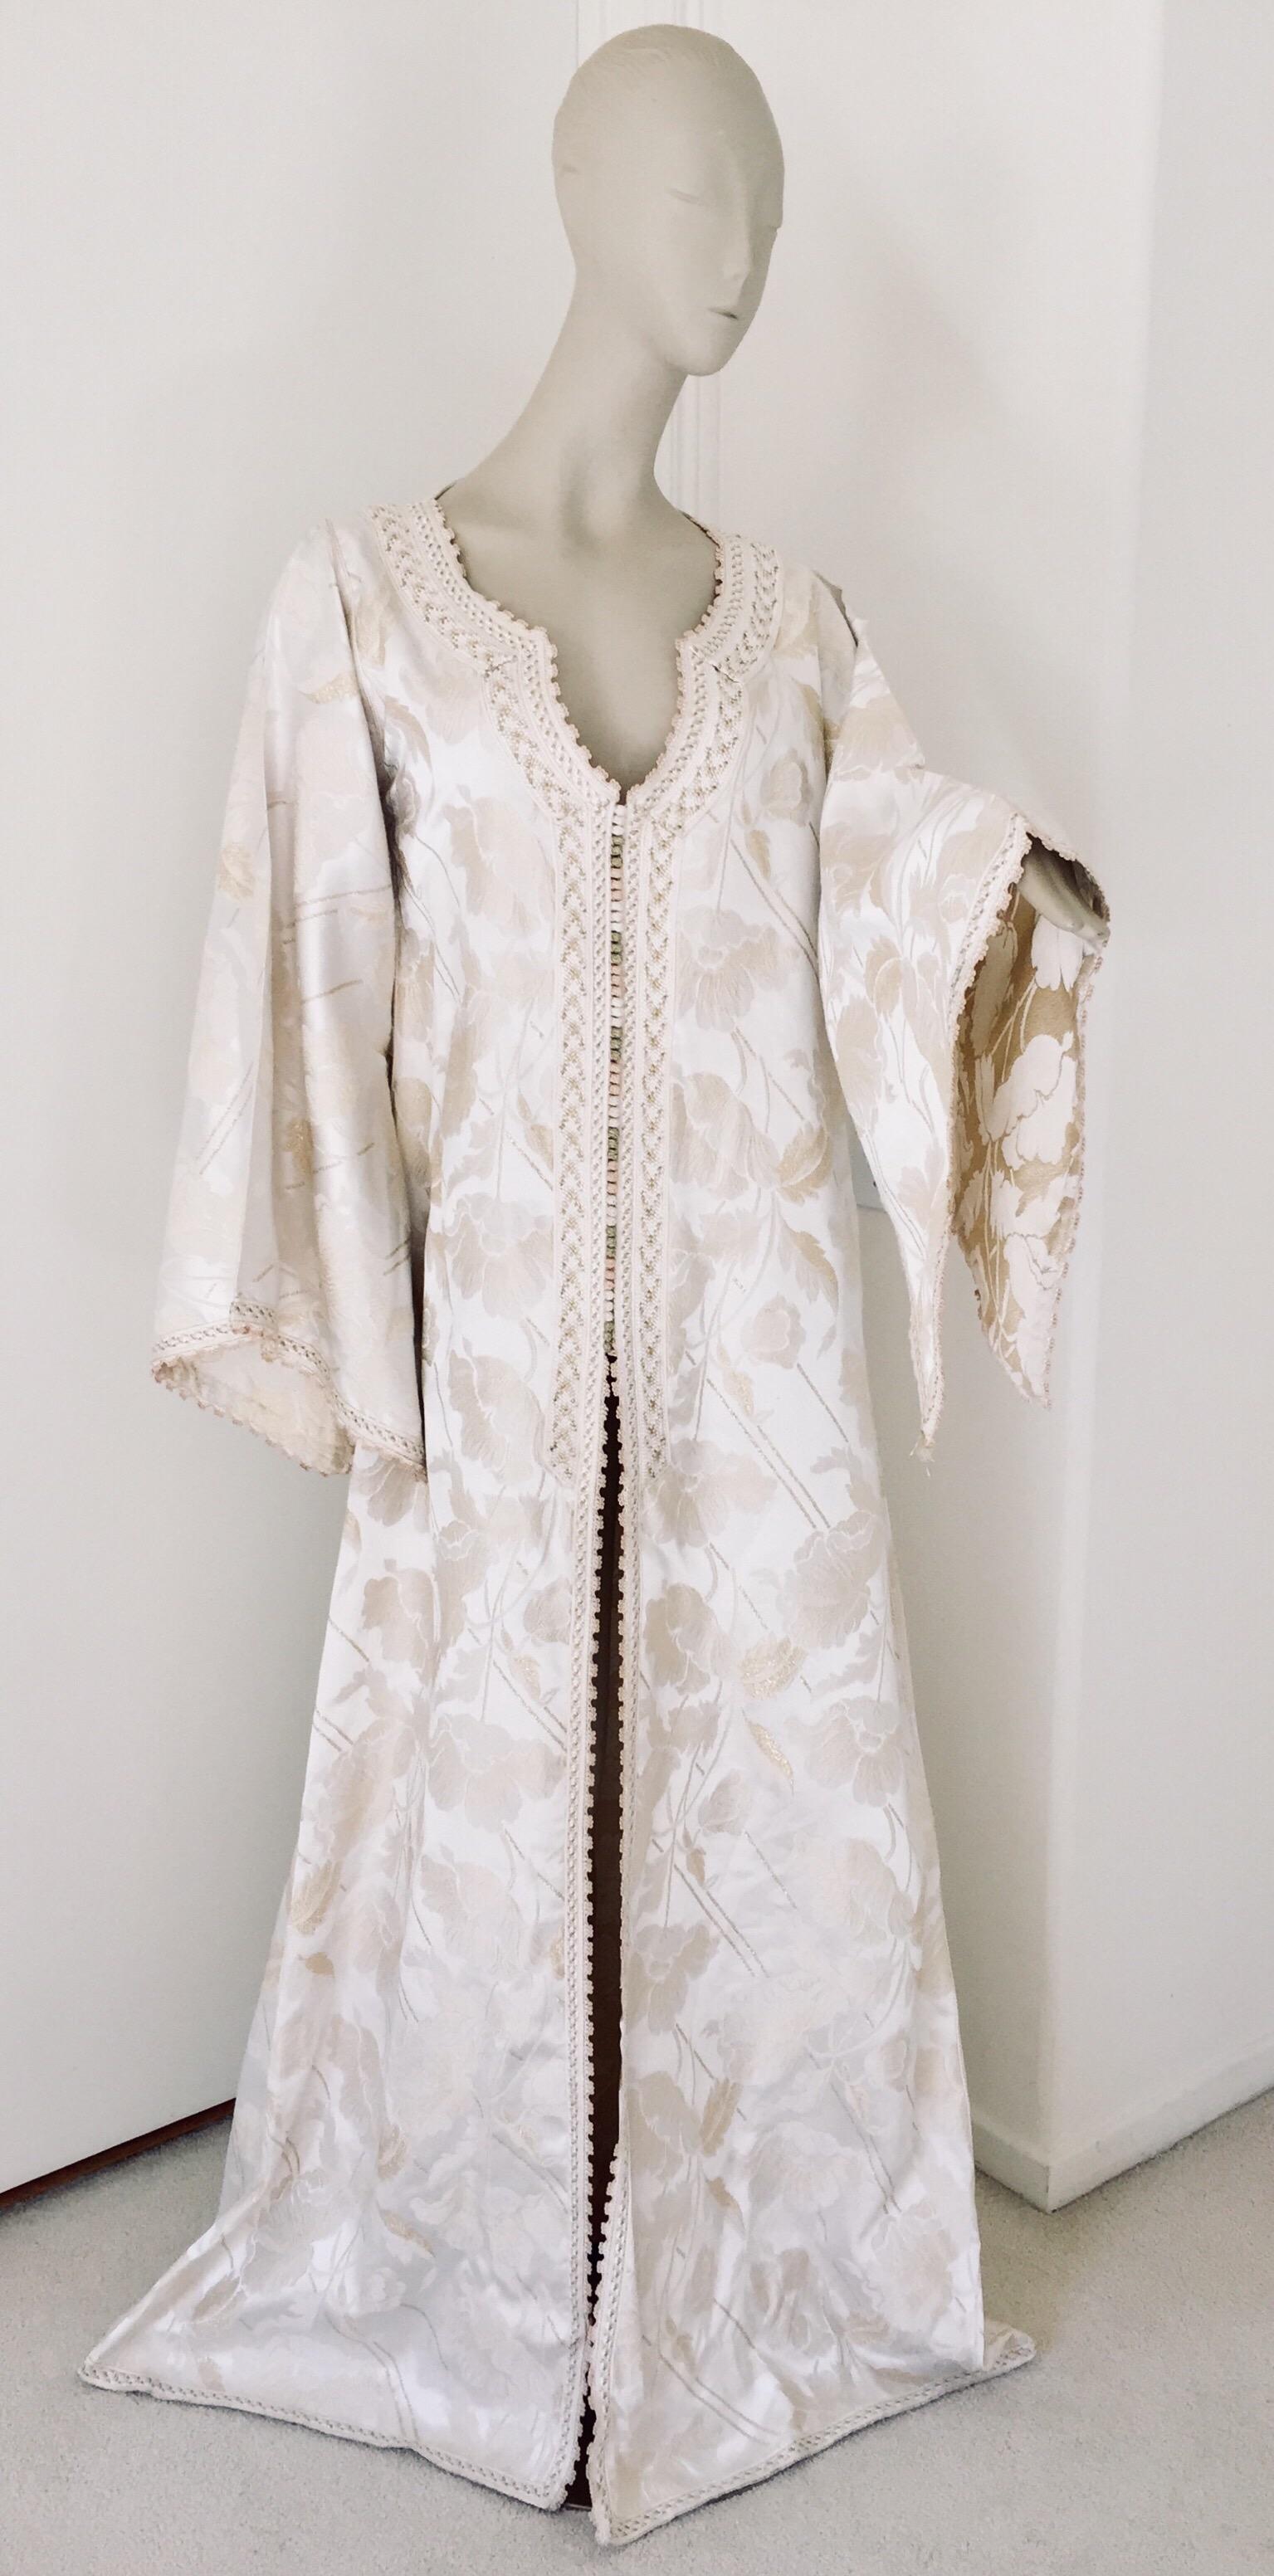 Elegant Moroccan white ivory and old brocade kaftan embroidered with gold trim threads.
Size L to XL circa 1980s.
This long maxi dress kaftan is embroidered and embellished entirely by hand.
One of a kind evening Moroccan Middle Eastern